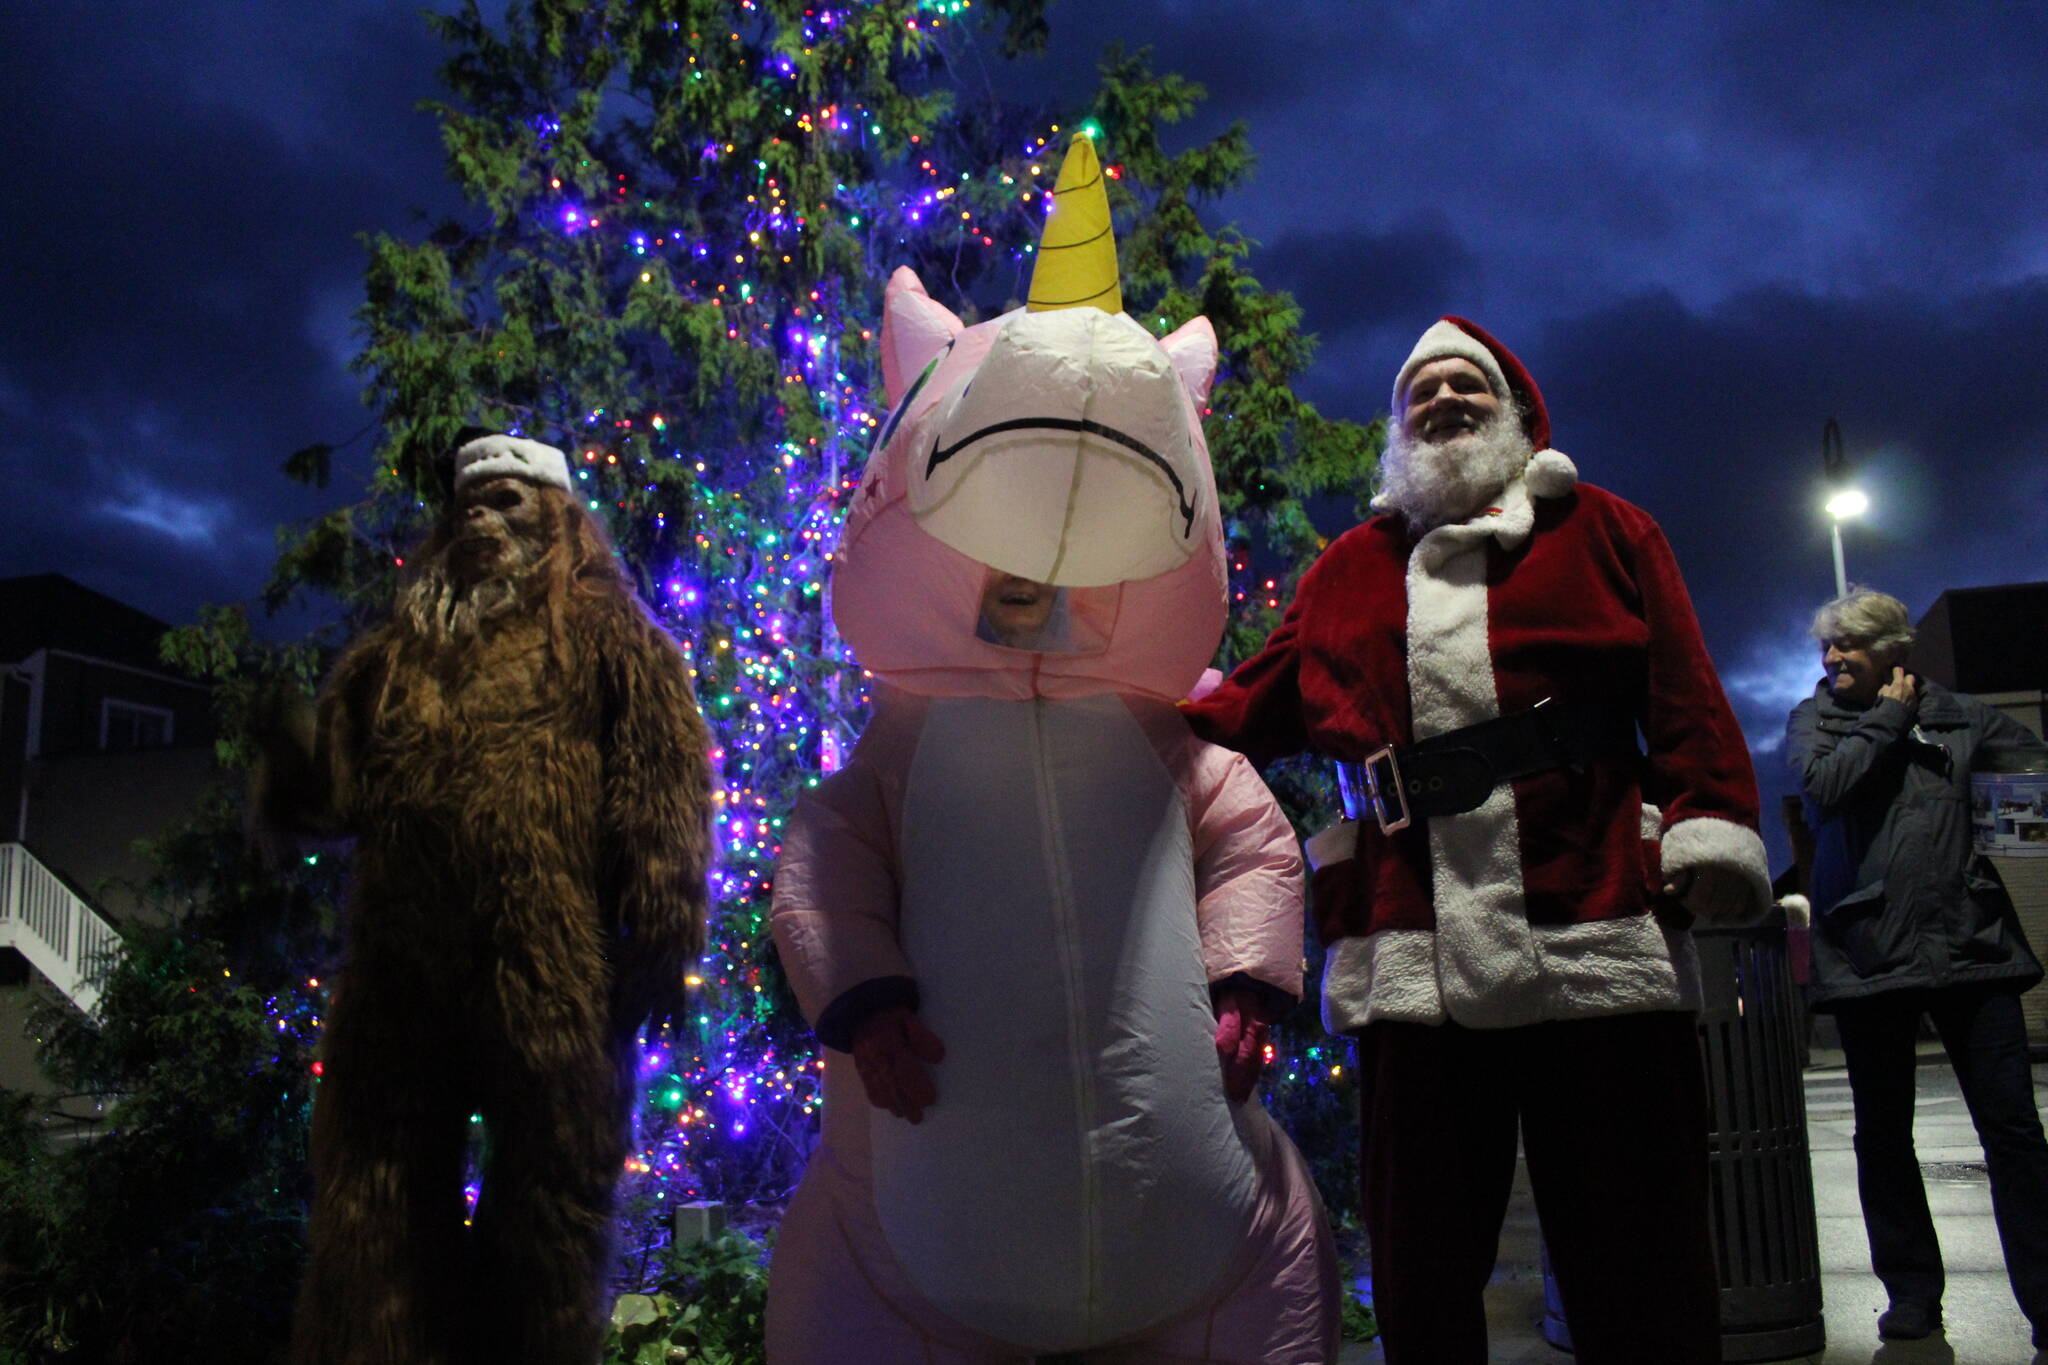 Photo by Karina Andrew/Whidbey News-Times
Santa lights the tree in downtown Oak Harbor, aided by none other than Sasquatch and a pink unicorn.